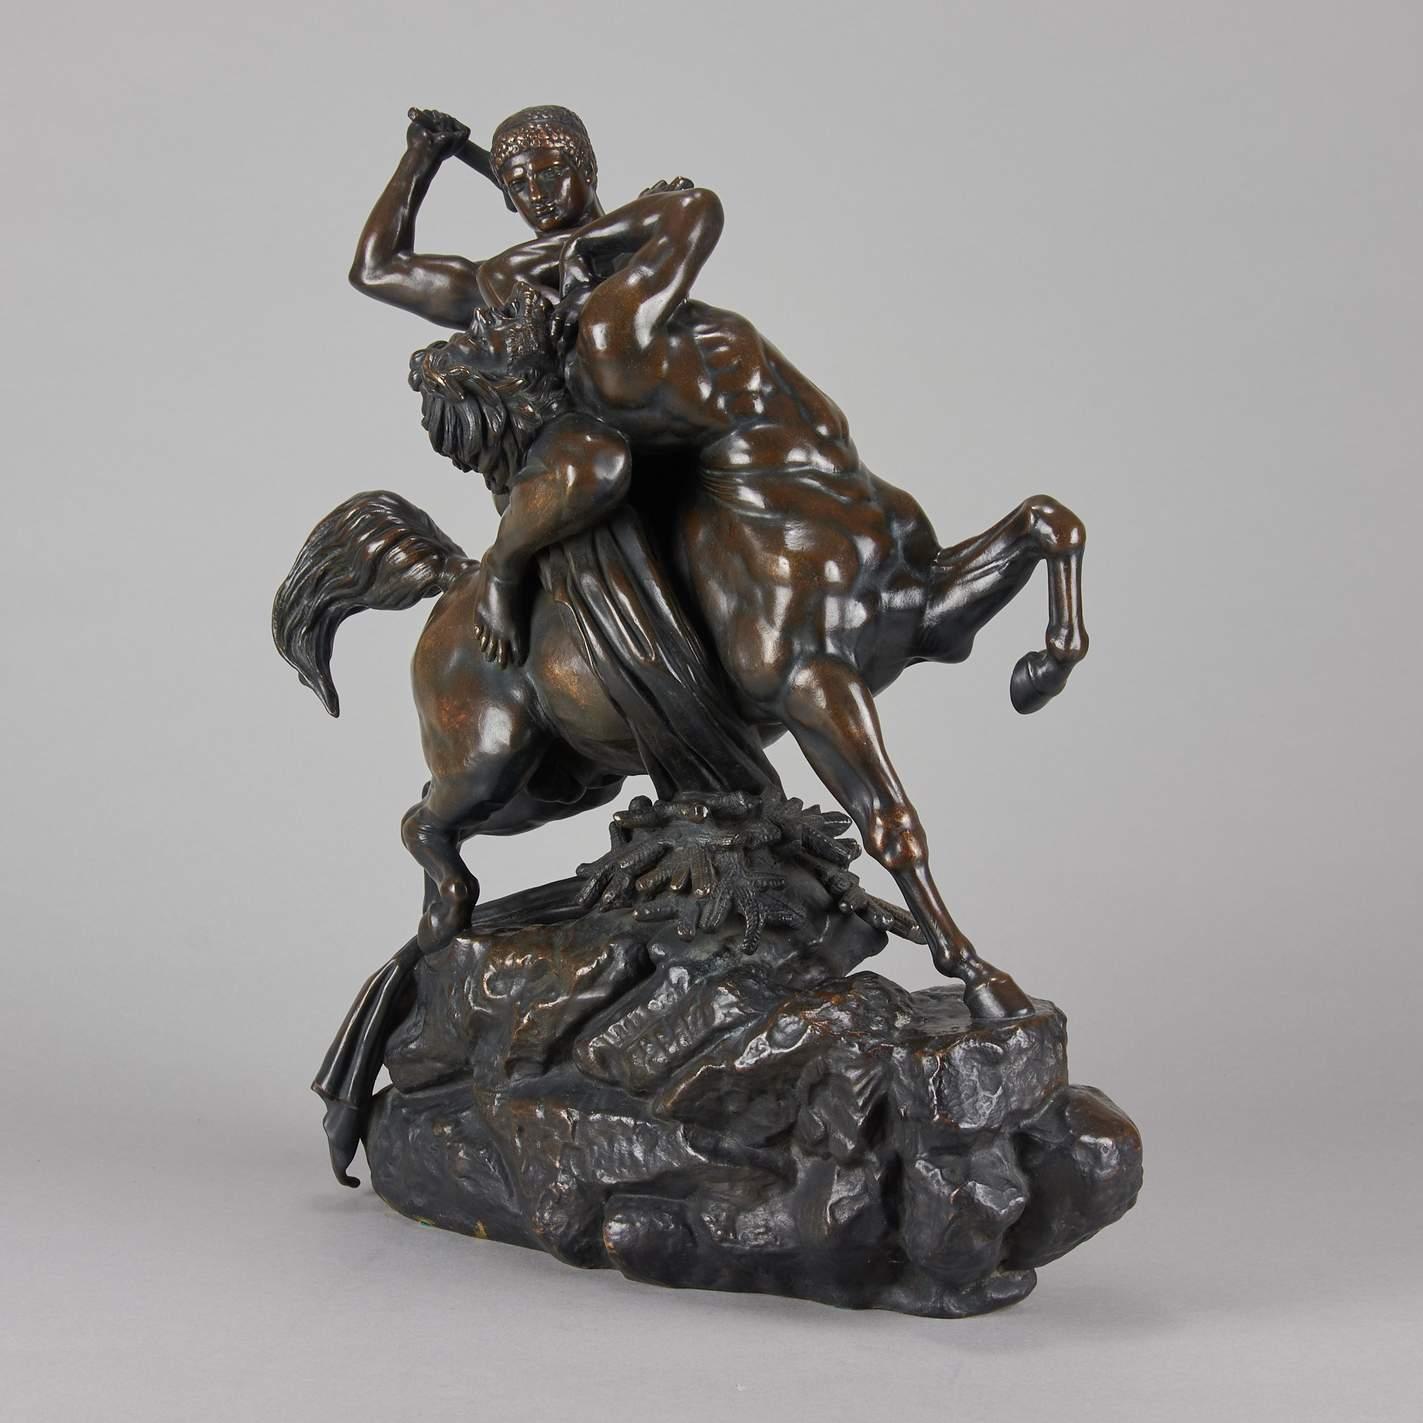 Magnificent bronze group entitled ‘Theseus and the Centaur’ by Antoine L Barye. The bronze with rich black, brown and orange patination and excellent surface detail. Raised on a naturalistic bronze plinth, signed Barye & inscribed F Barbedienne